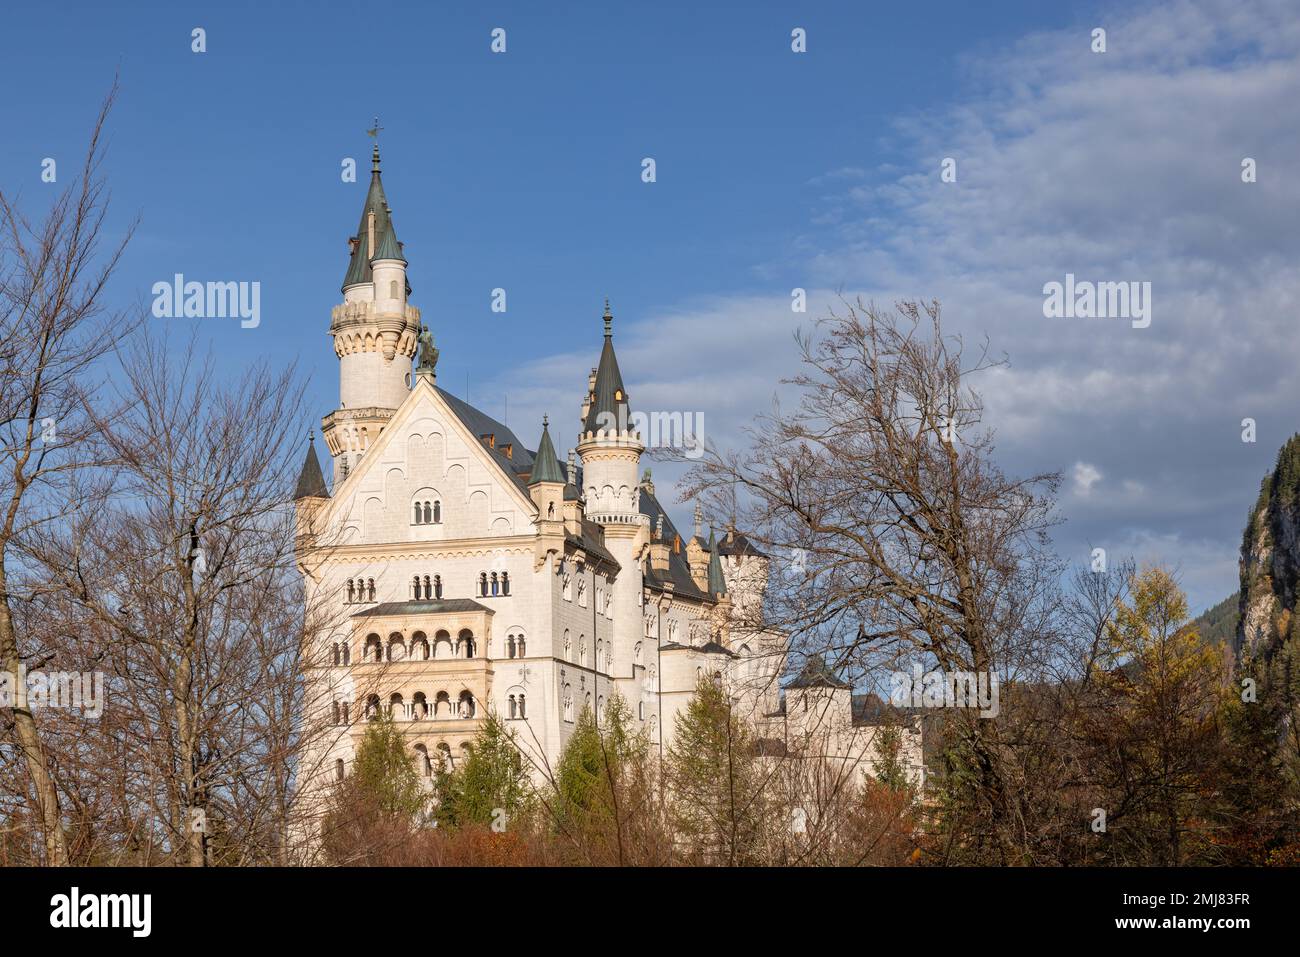 Neuschwanstein castle in Schwangau Germany,  view of the tower on a sunny autumn day. Stock Photo